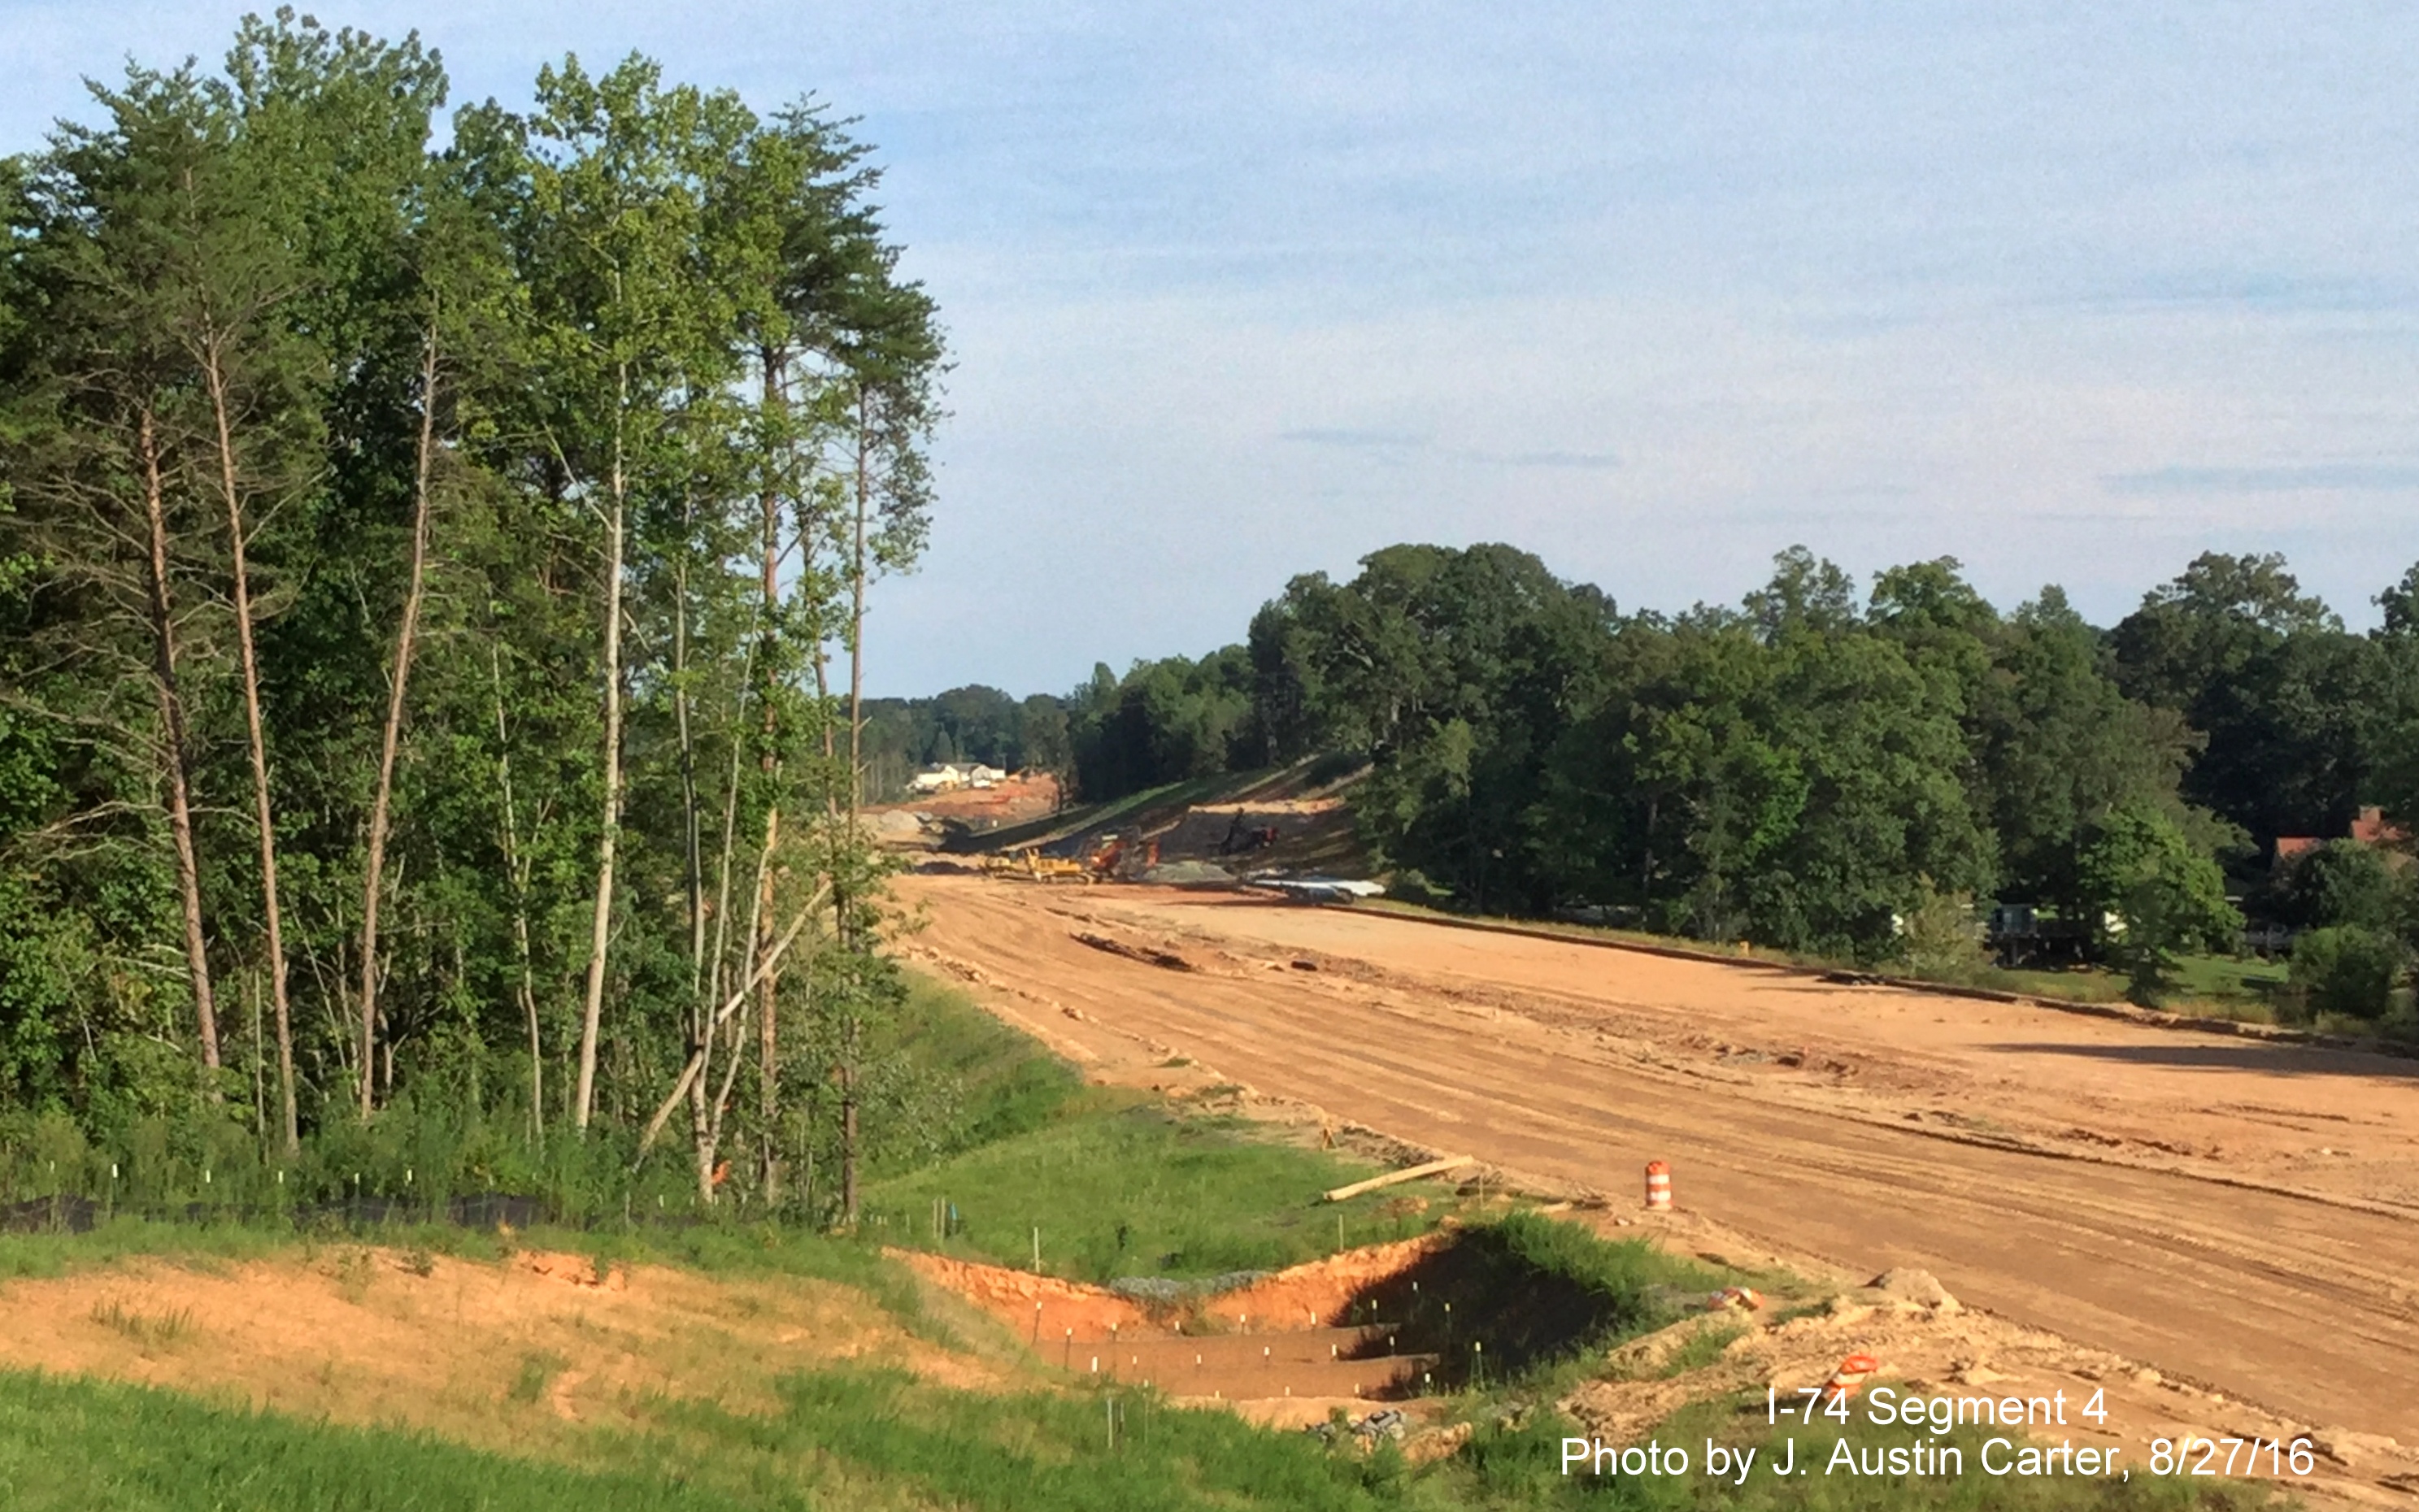 Image of Beltway construction going on between houses east of Winston-Salem, by J. Austin Carter